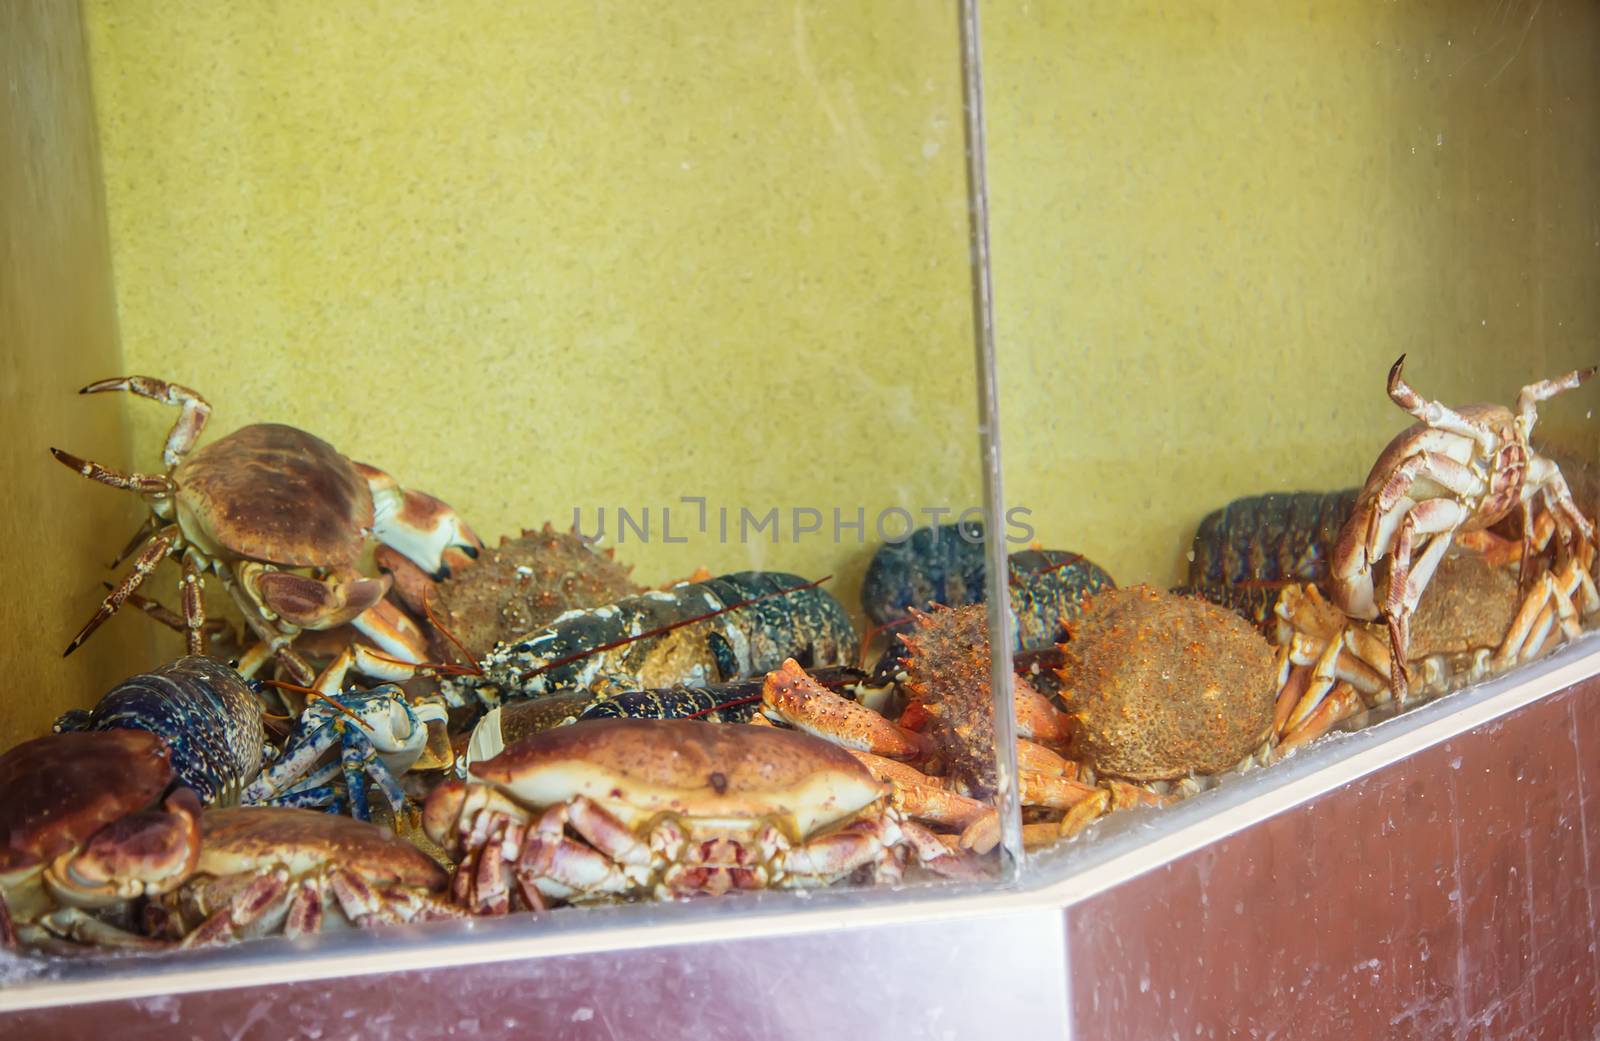 Crab with lobster in fishpond at fish market